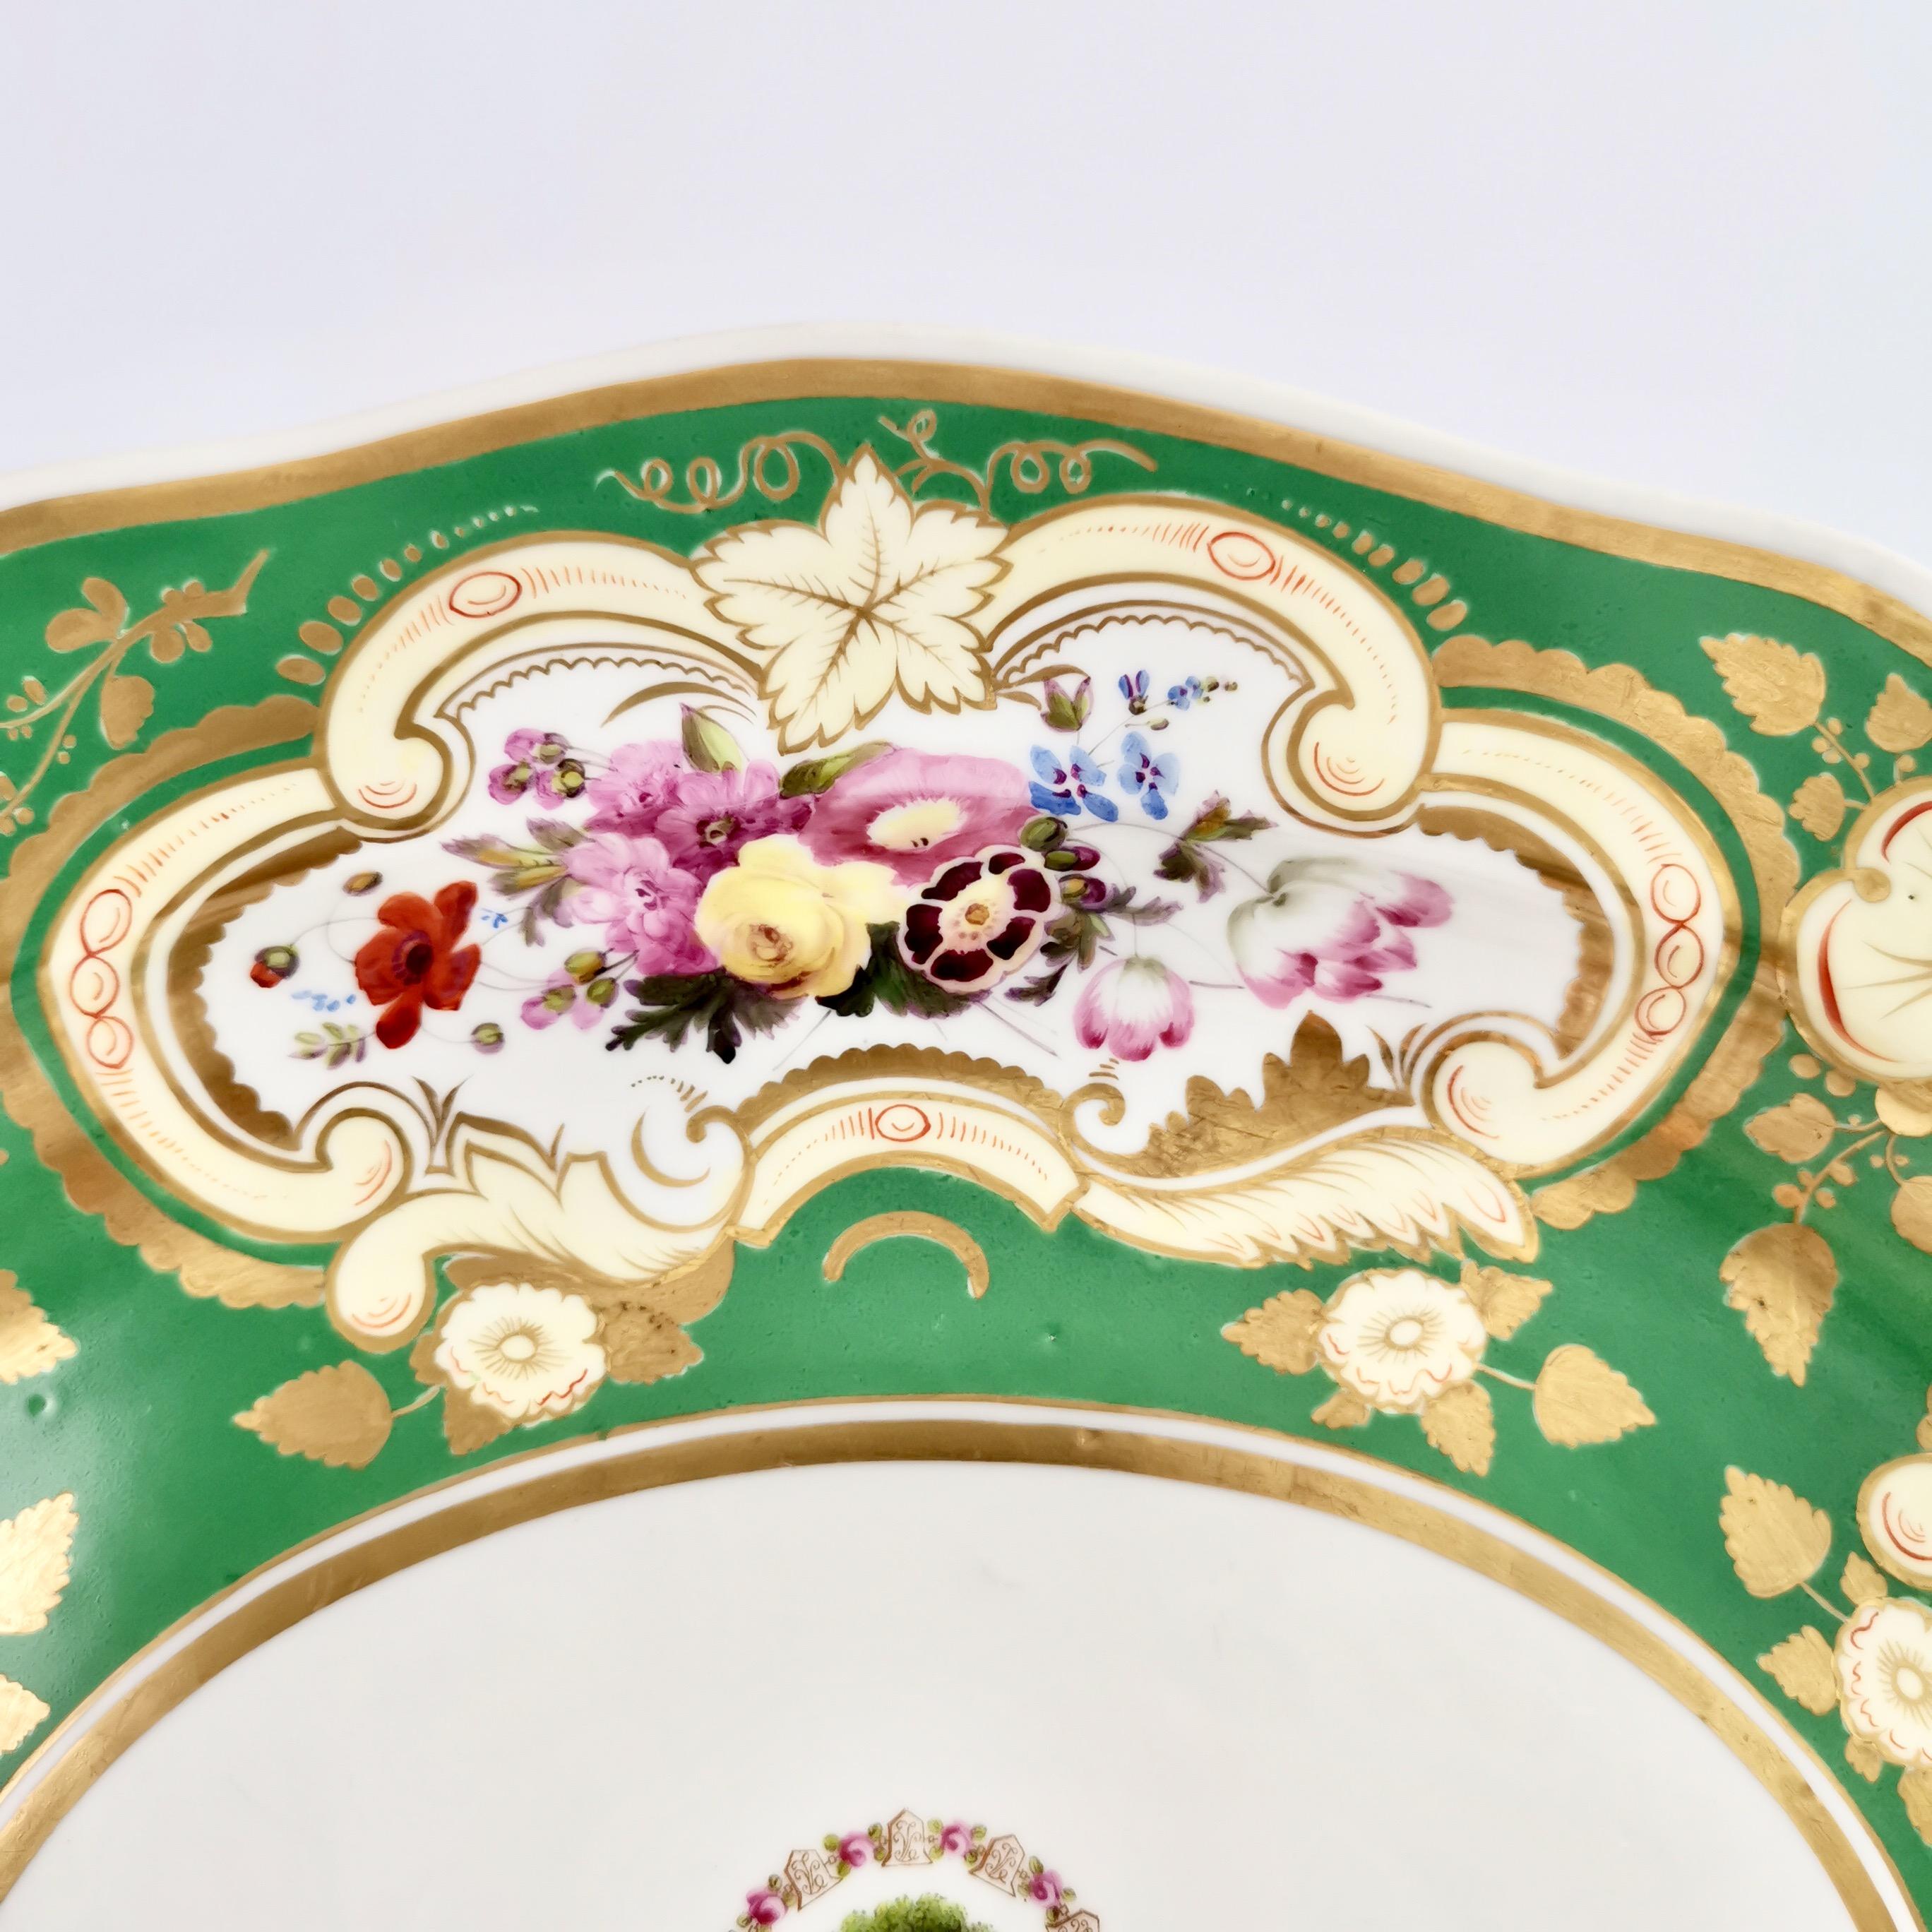 Mid-19th Century Chamberlains Worcester Meat Platter, Green, Brazilian Order of the Rose, ca 1829